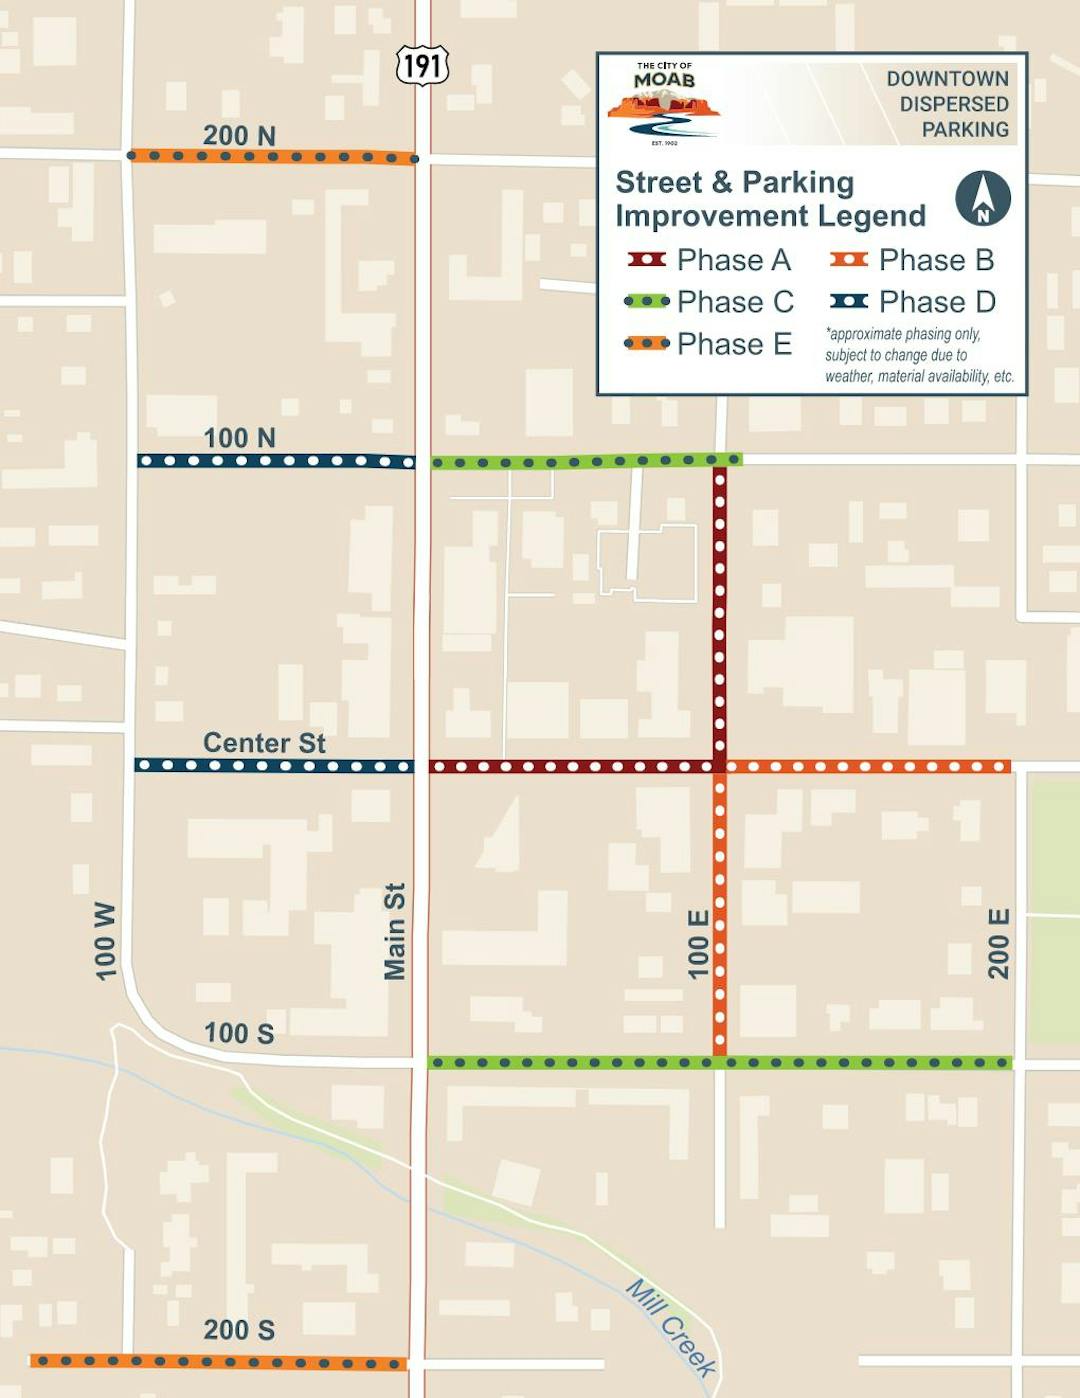 A map showing the parking design for multiple streets in Downtown Moab